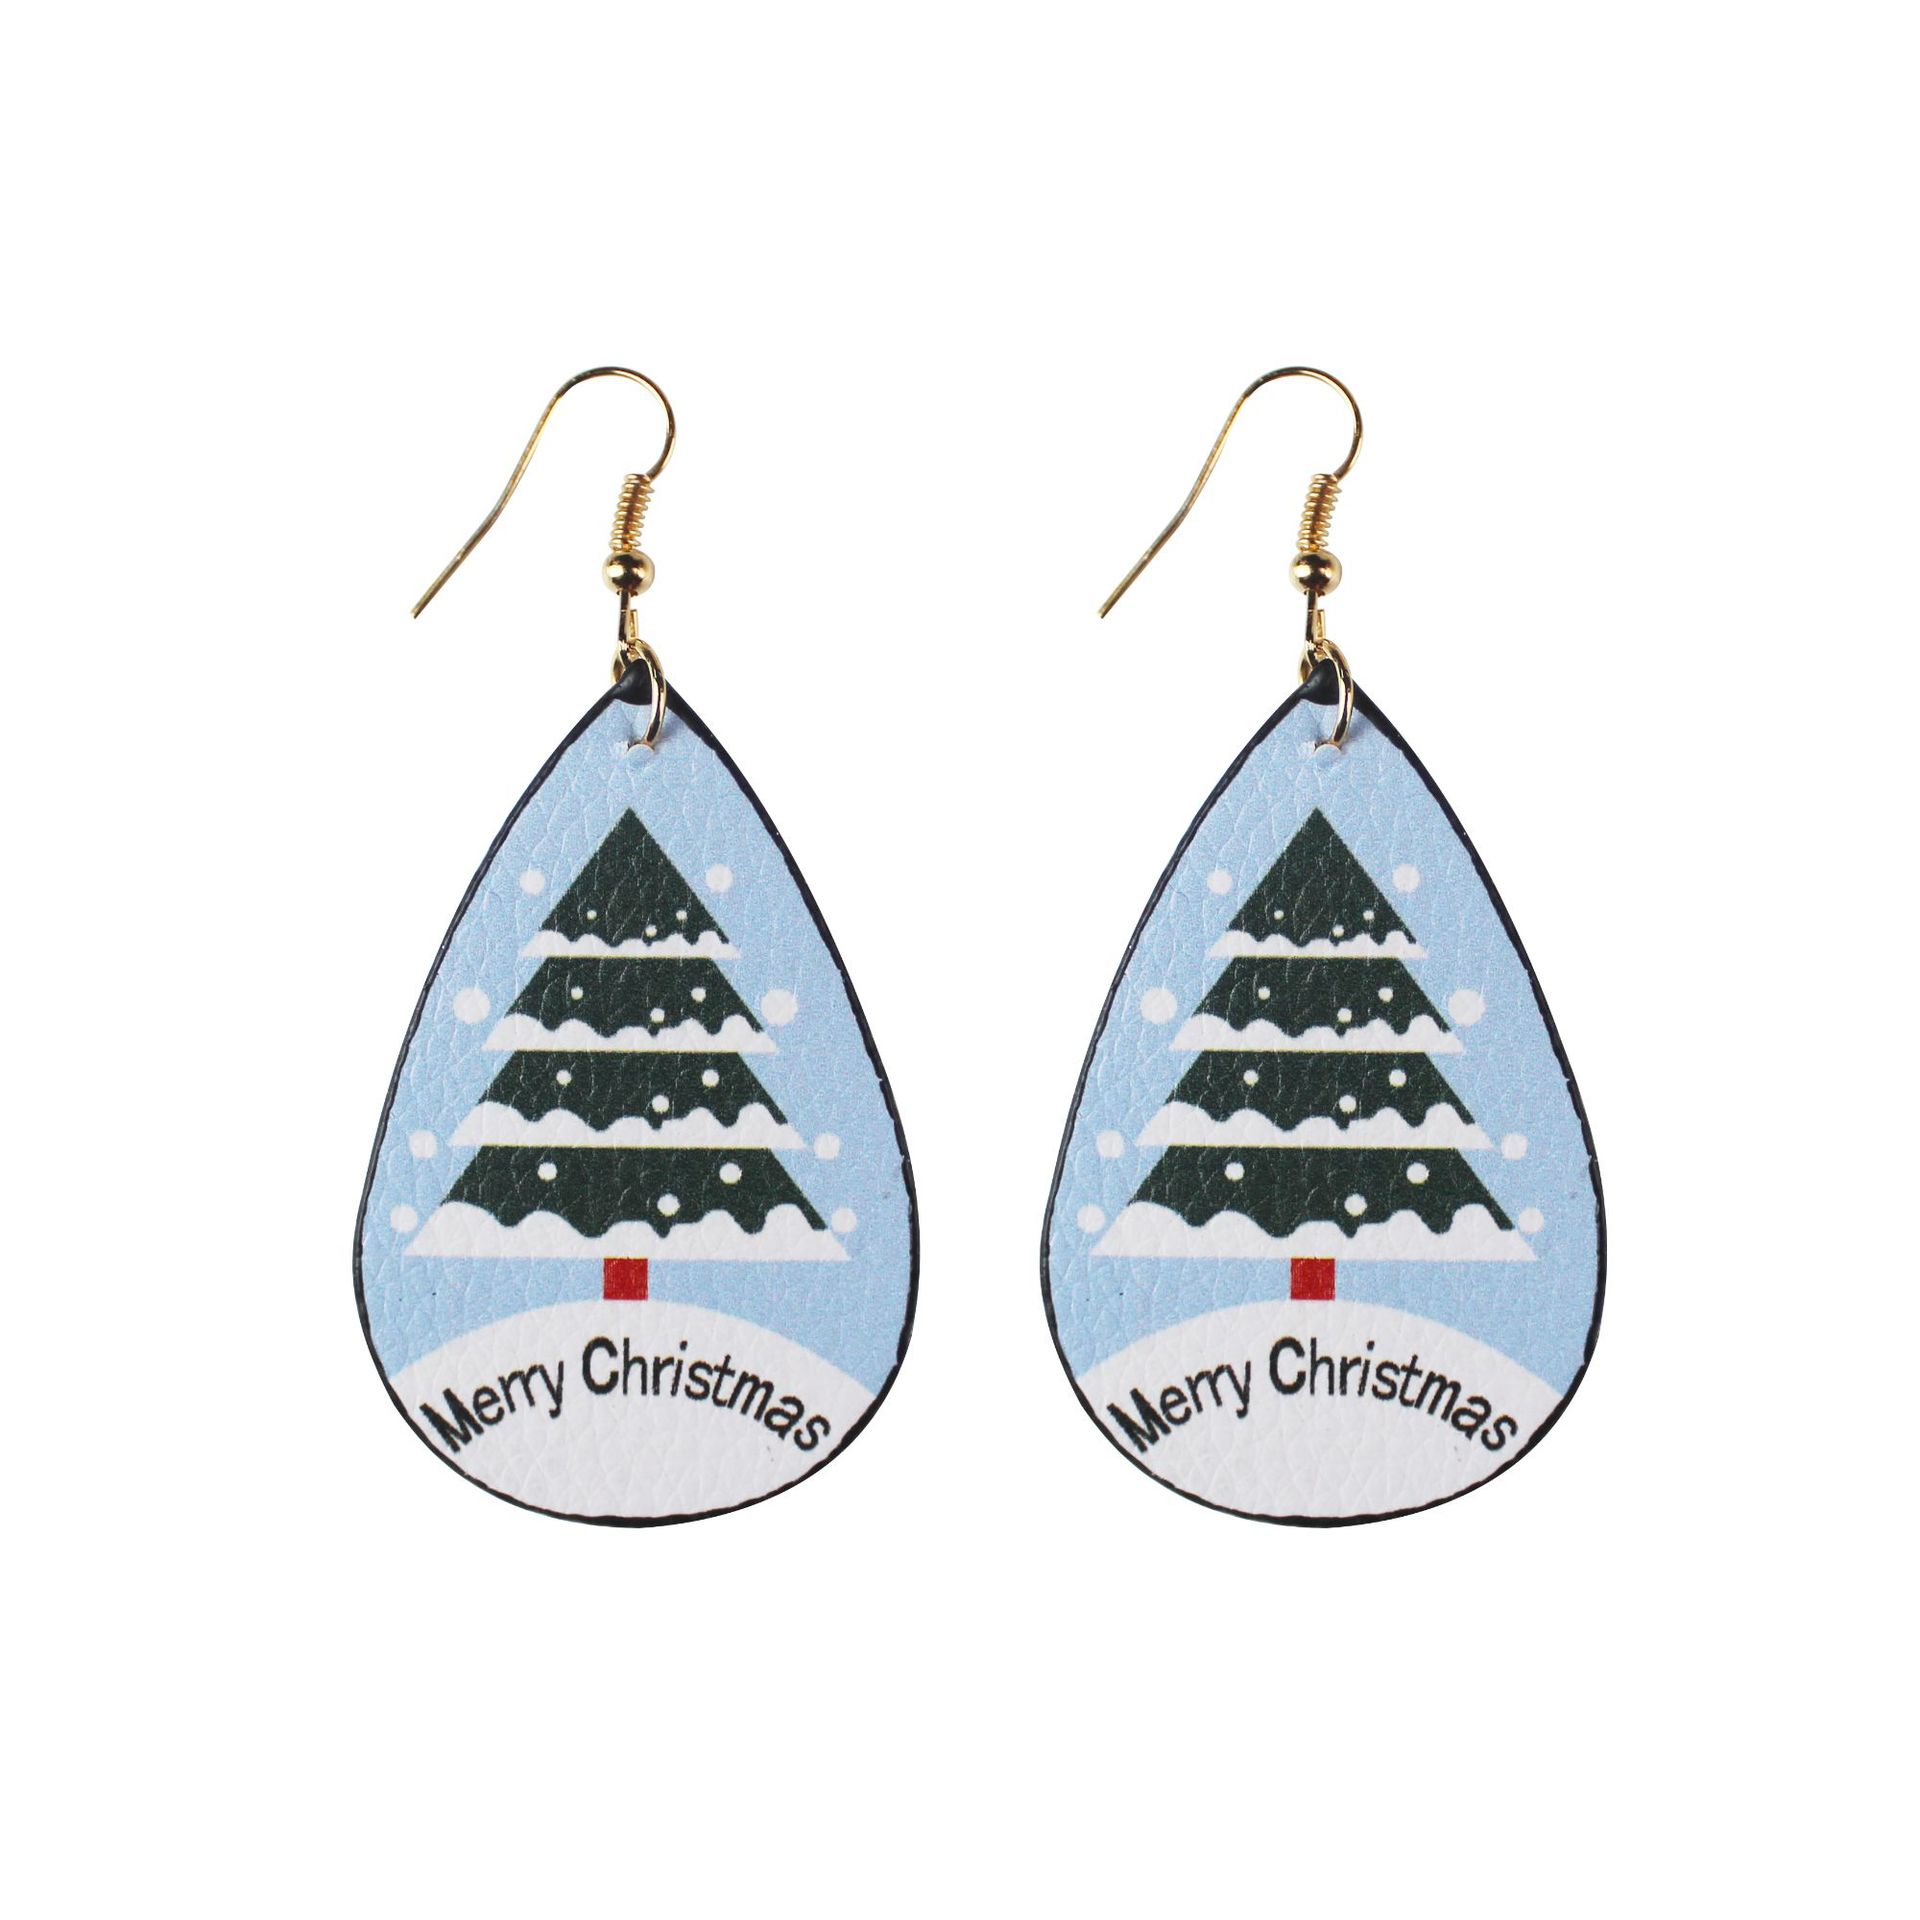 Leather Oil-Edged Earrings Christmas Christmas Tree Santa Claus Water-Drop Eardrops Holiday Ornament in Stock